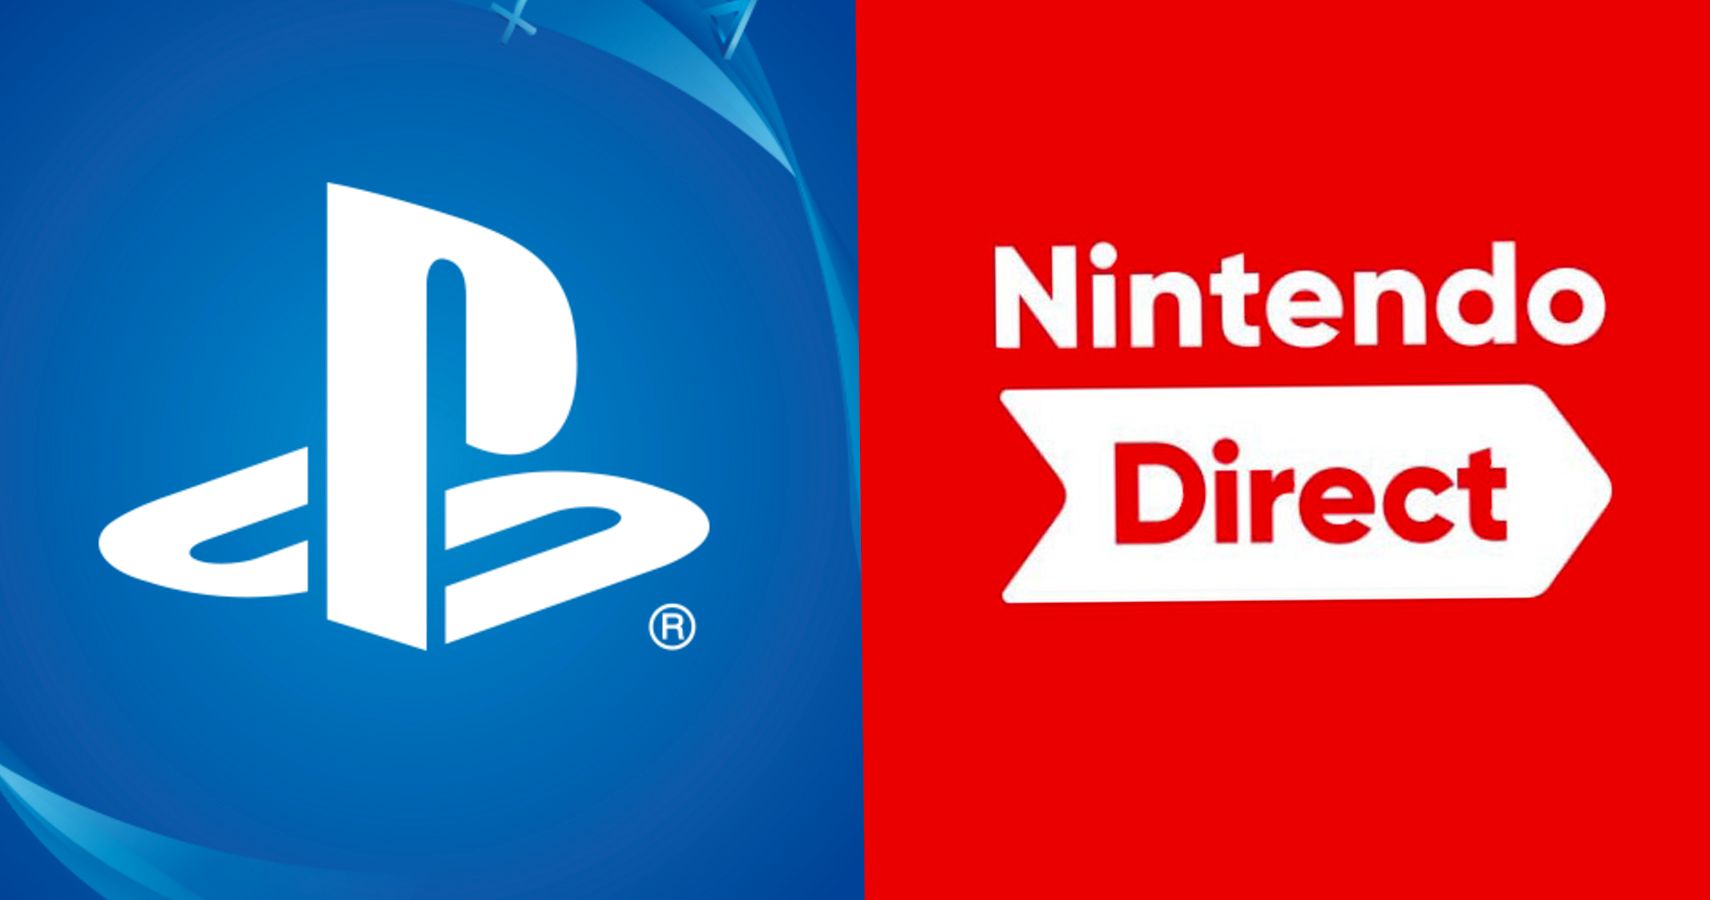 Let´s Talk About that Nintendo Direct & Sony State of Play